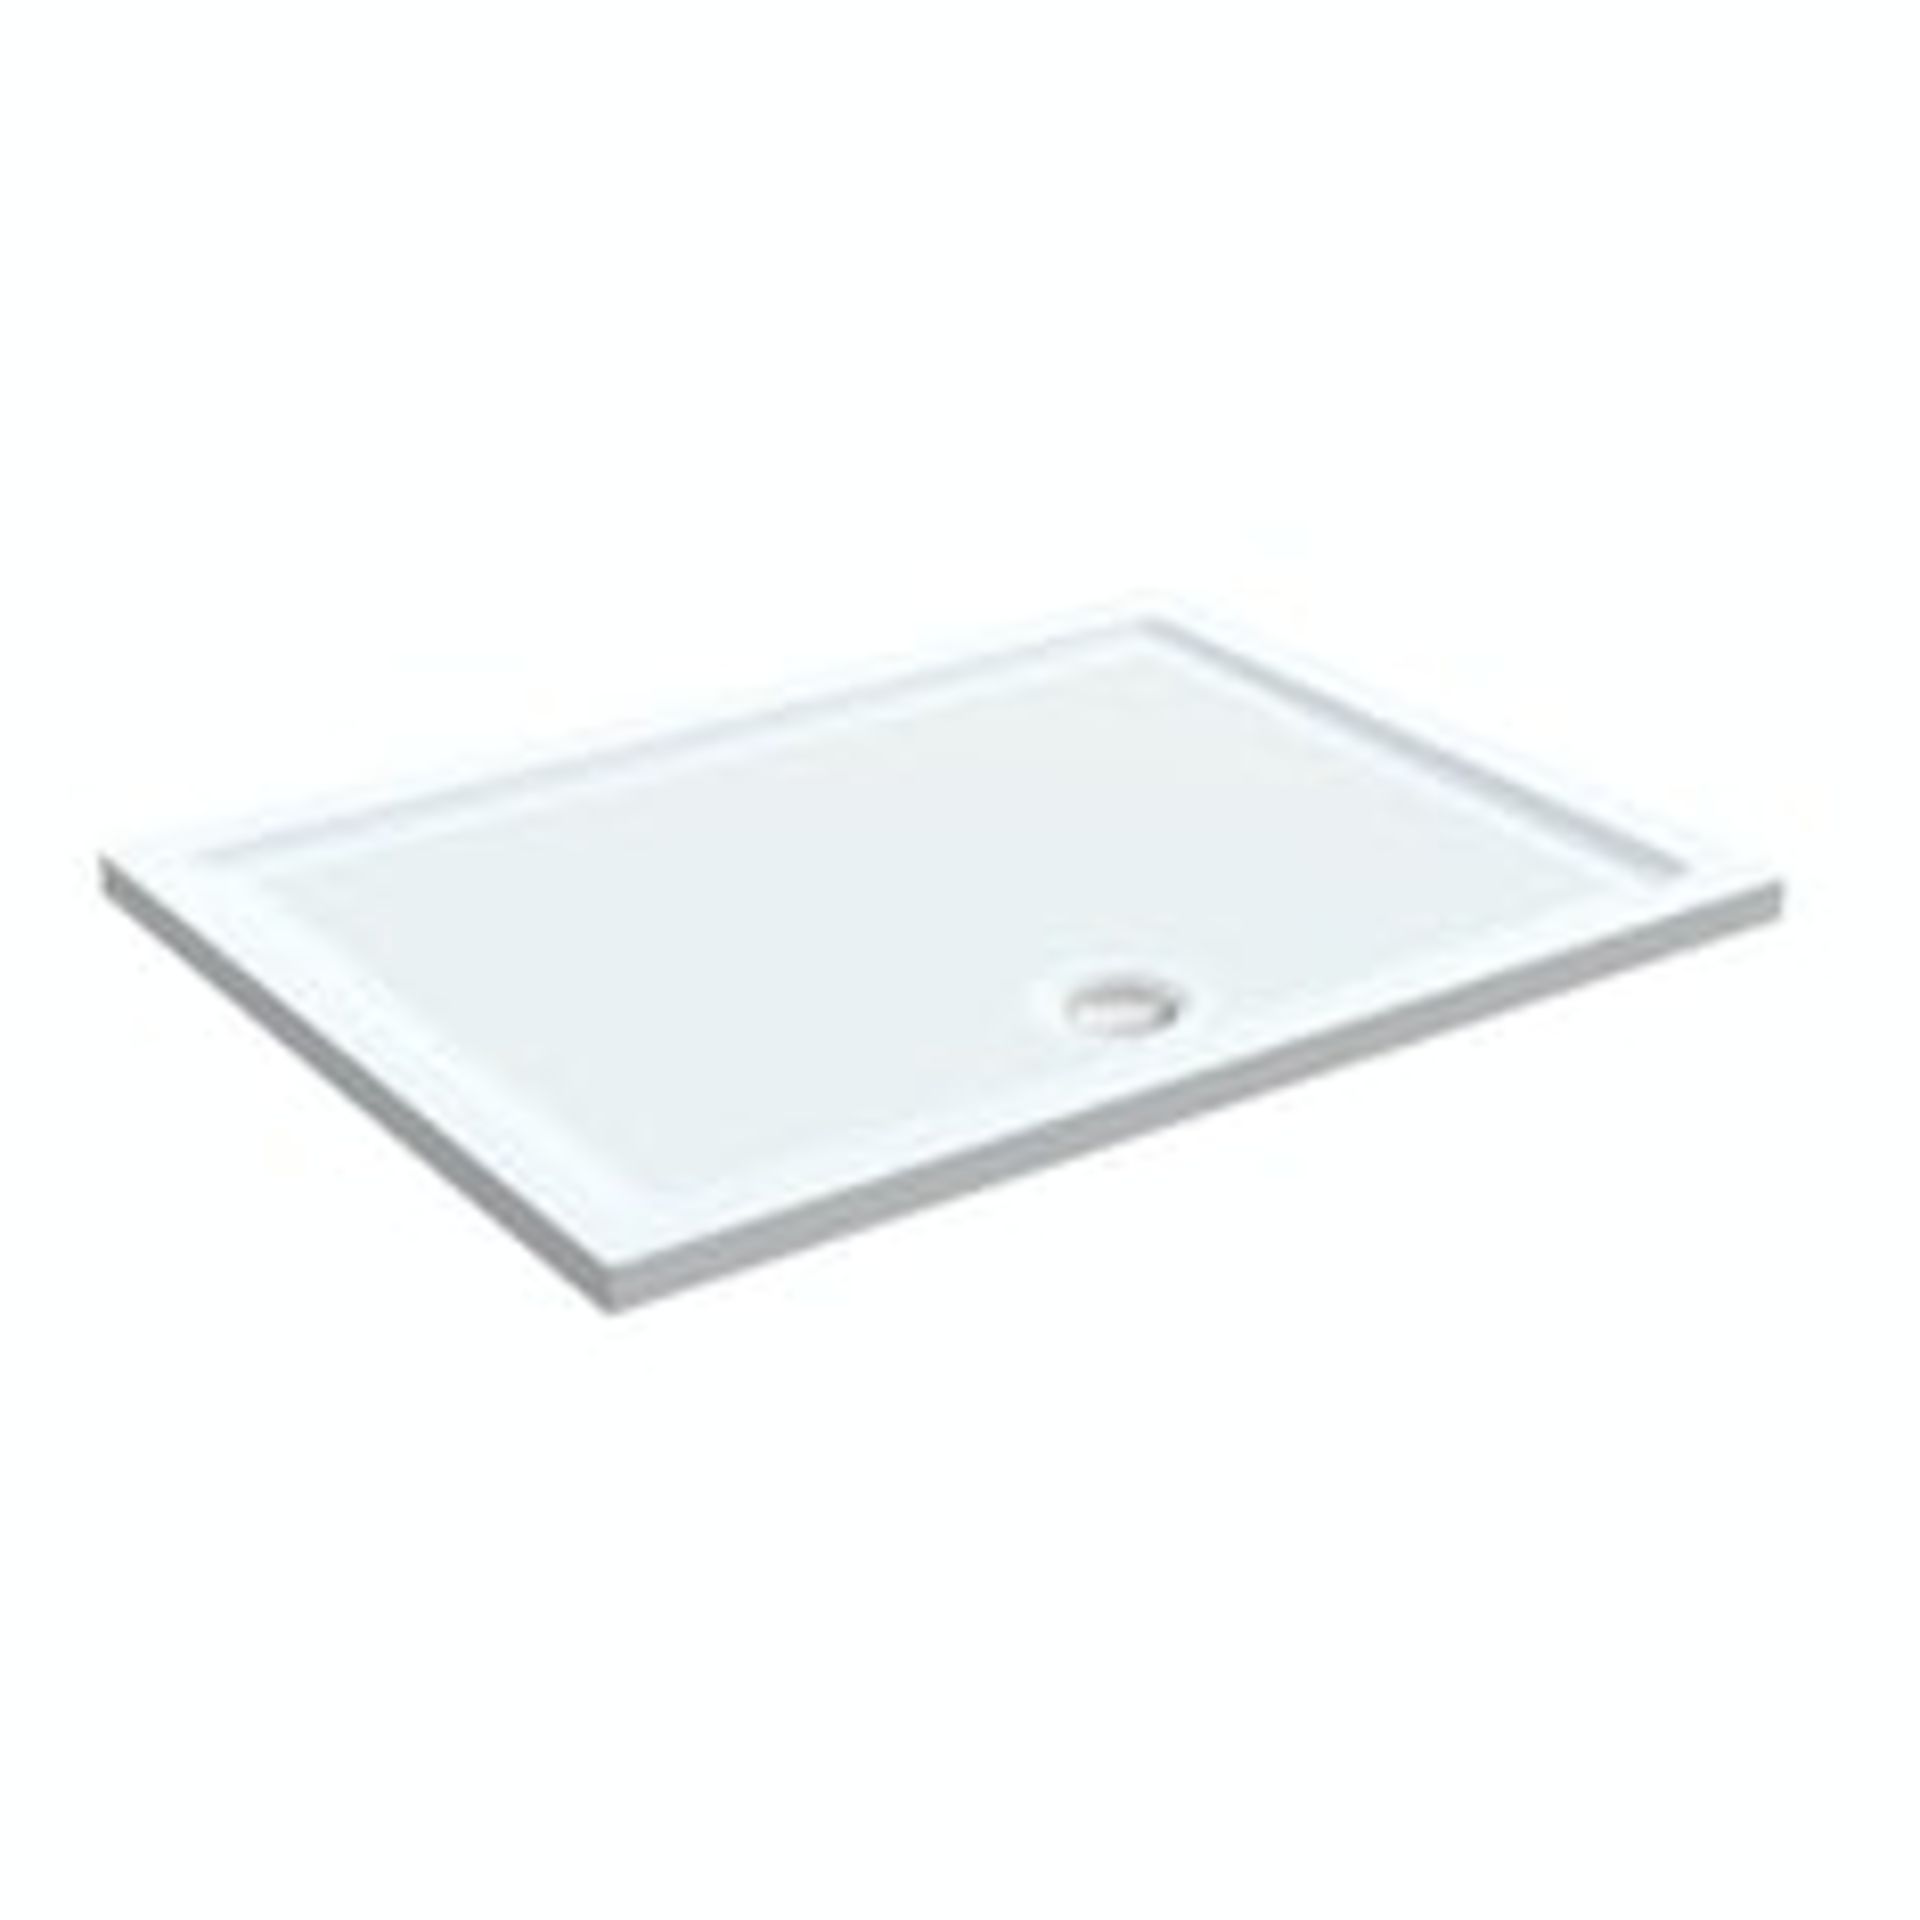 1400 x 800mm Large Wet room / Walk In Shower Tray. Stone Resin